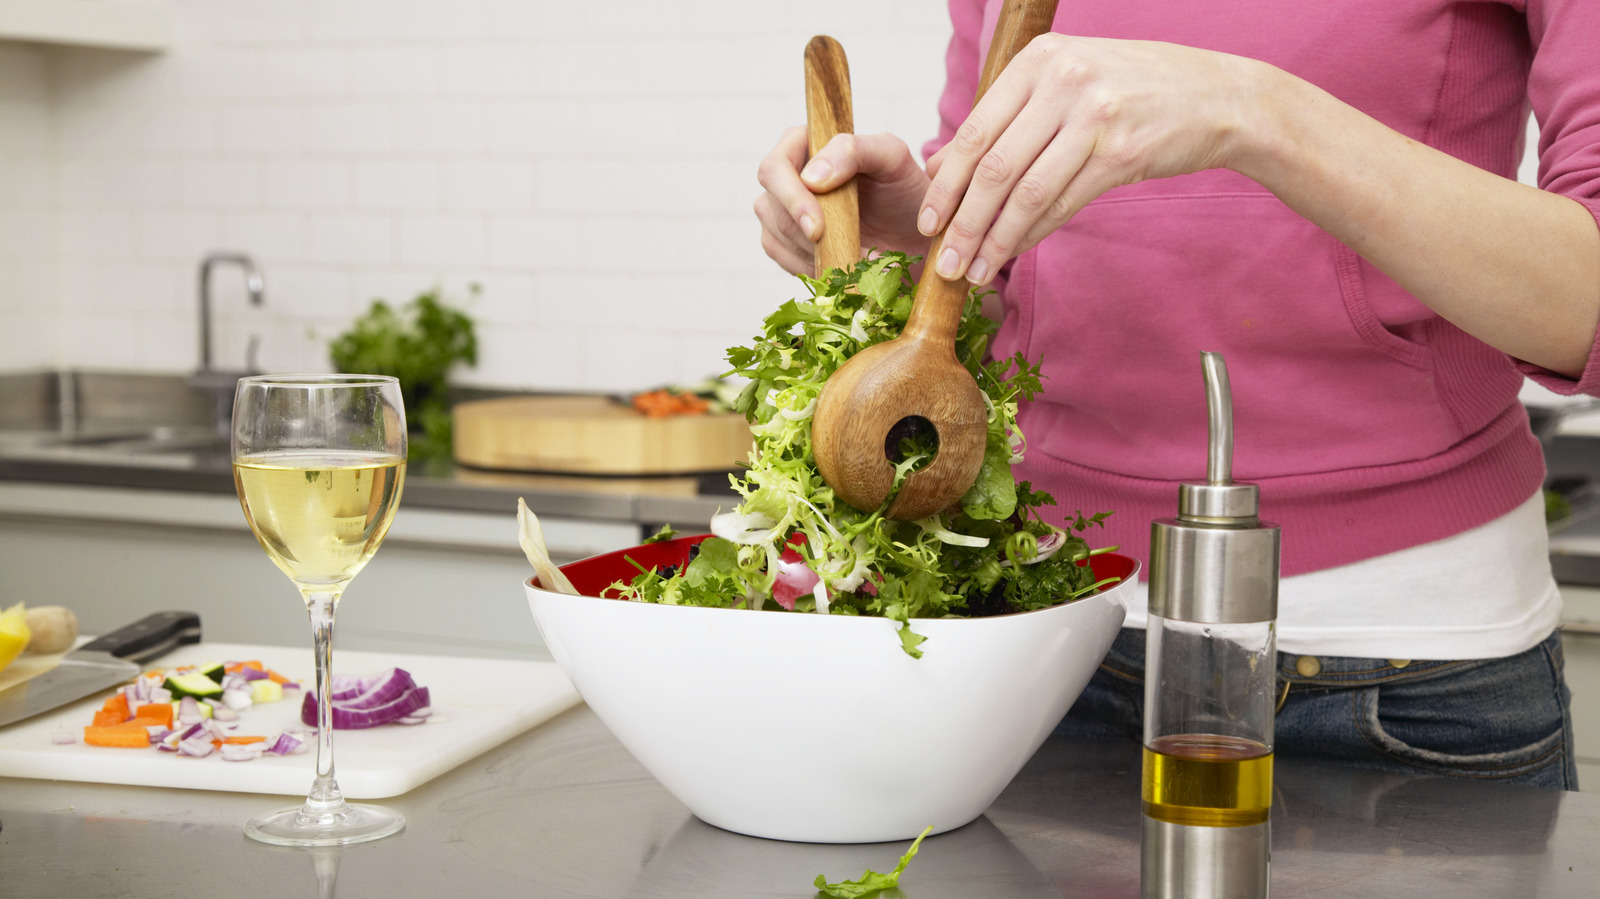 Why it's difficult to pair salads and wine